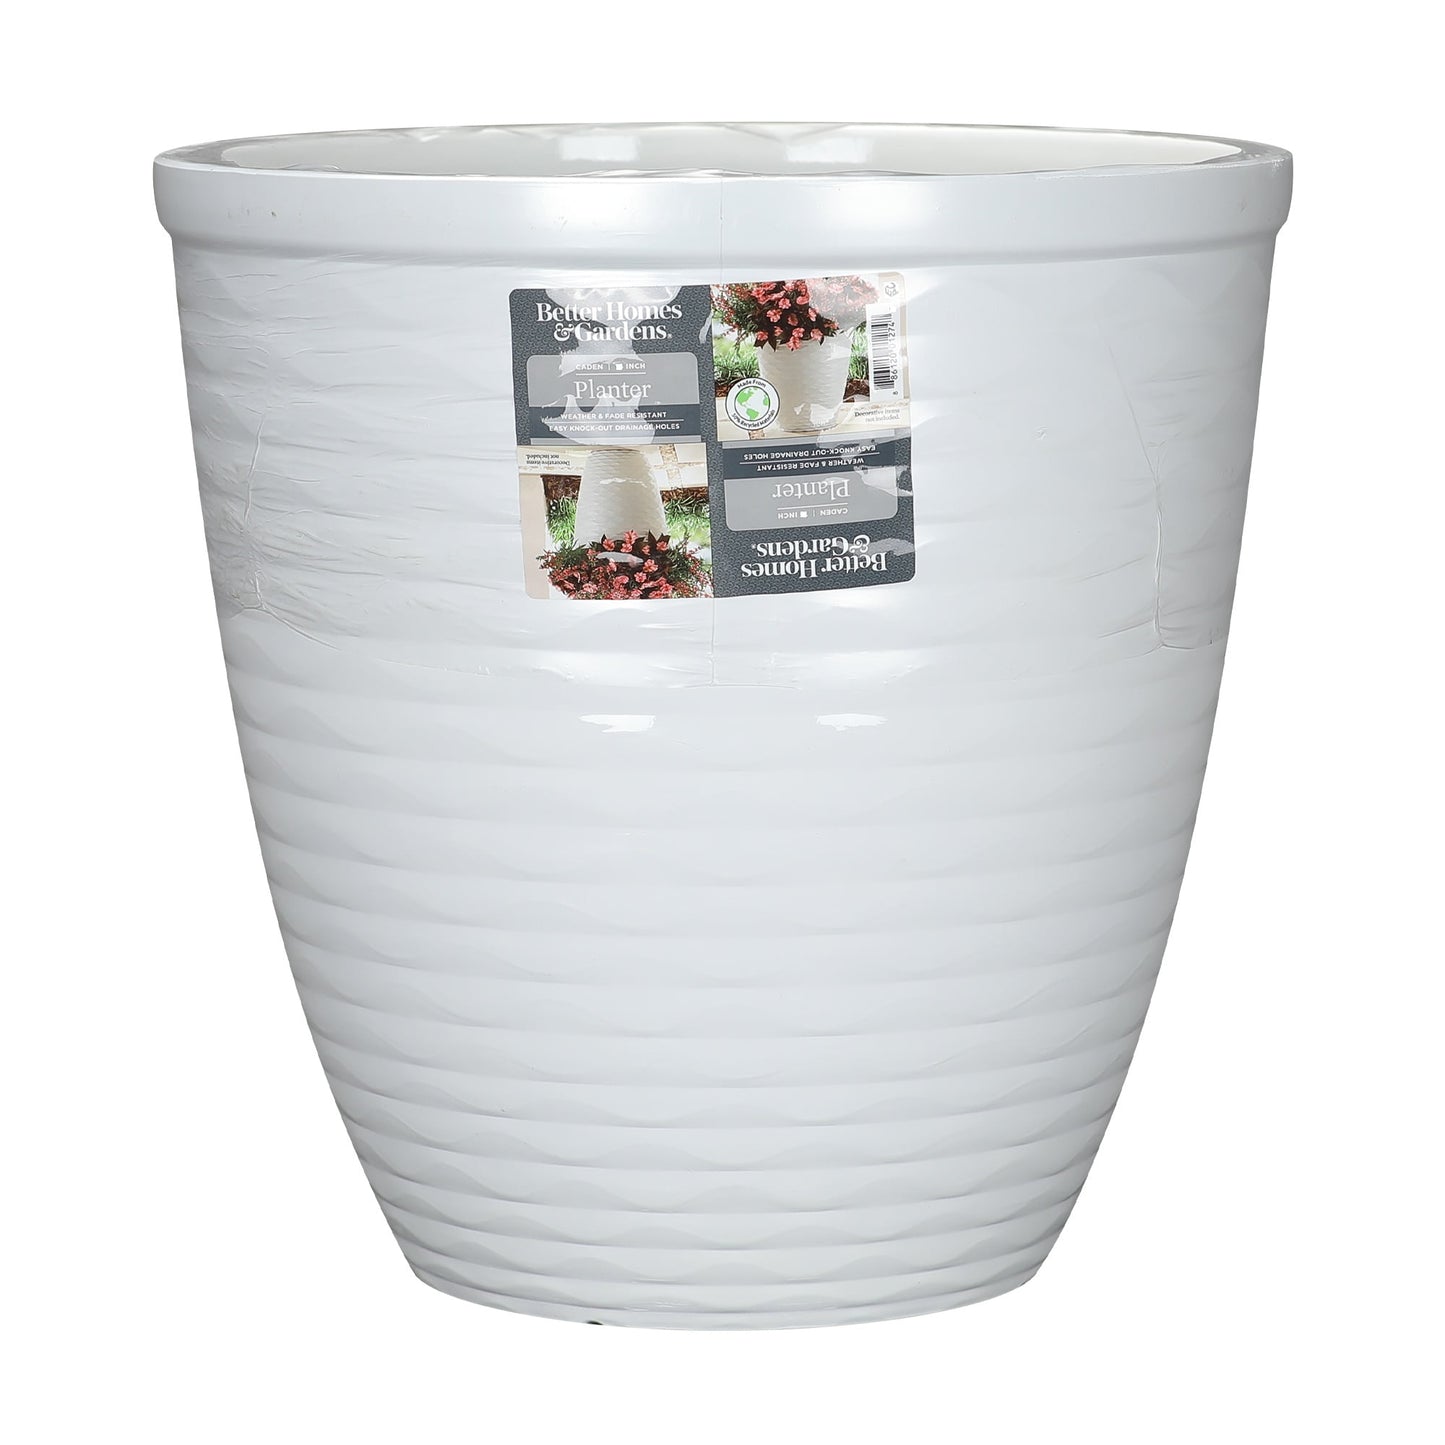 Better Homes & Gardens Caden White Recycled Resin Planter, 15.9in x 15.9in x 16in